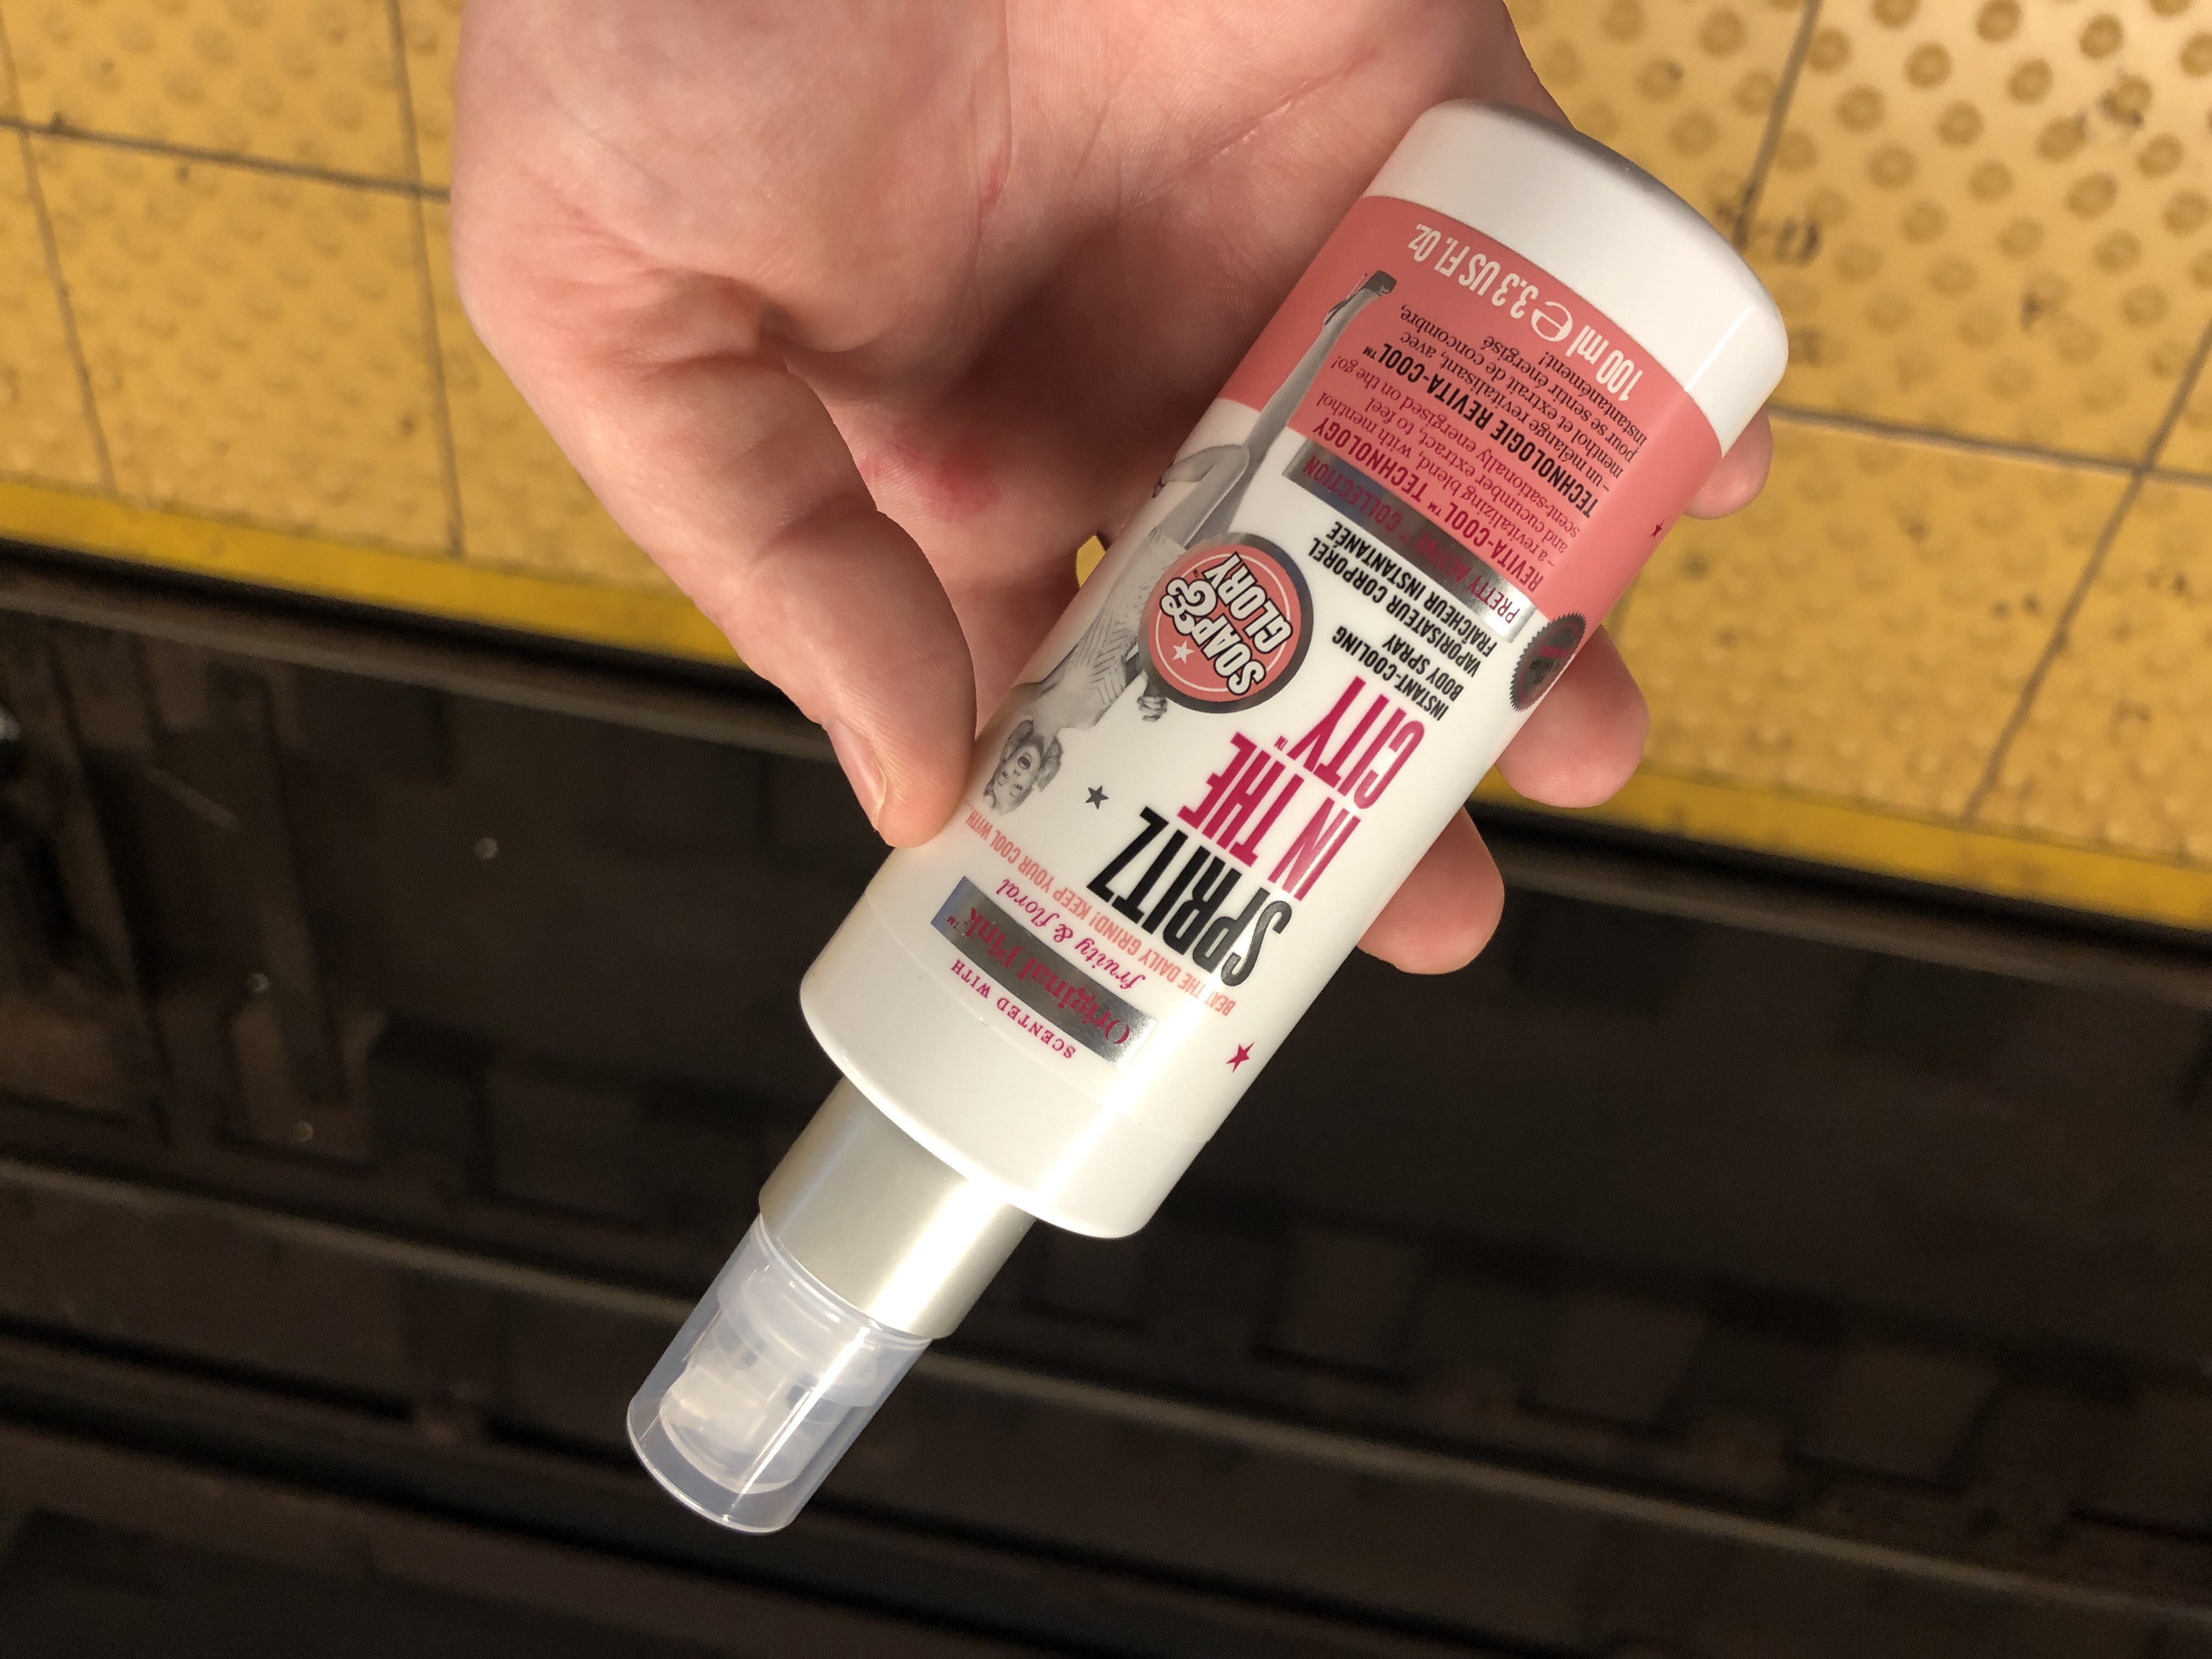 Soap & Glory cooling body spray